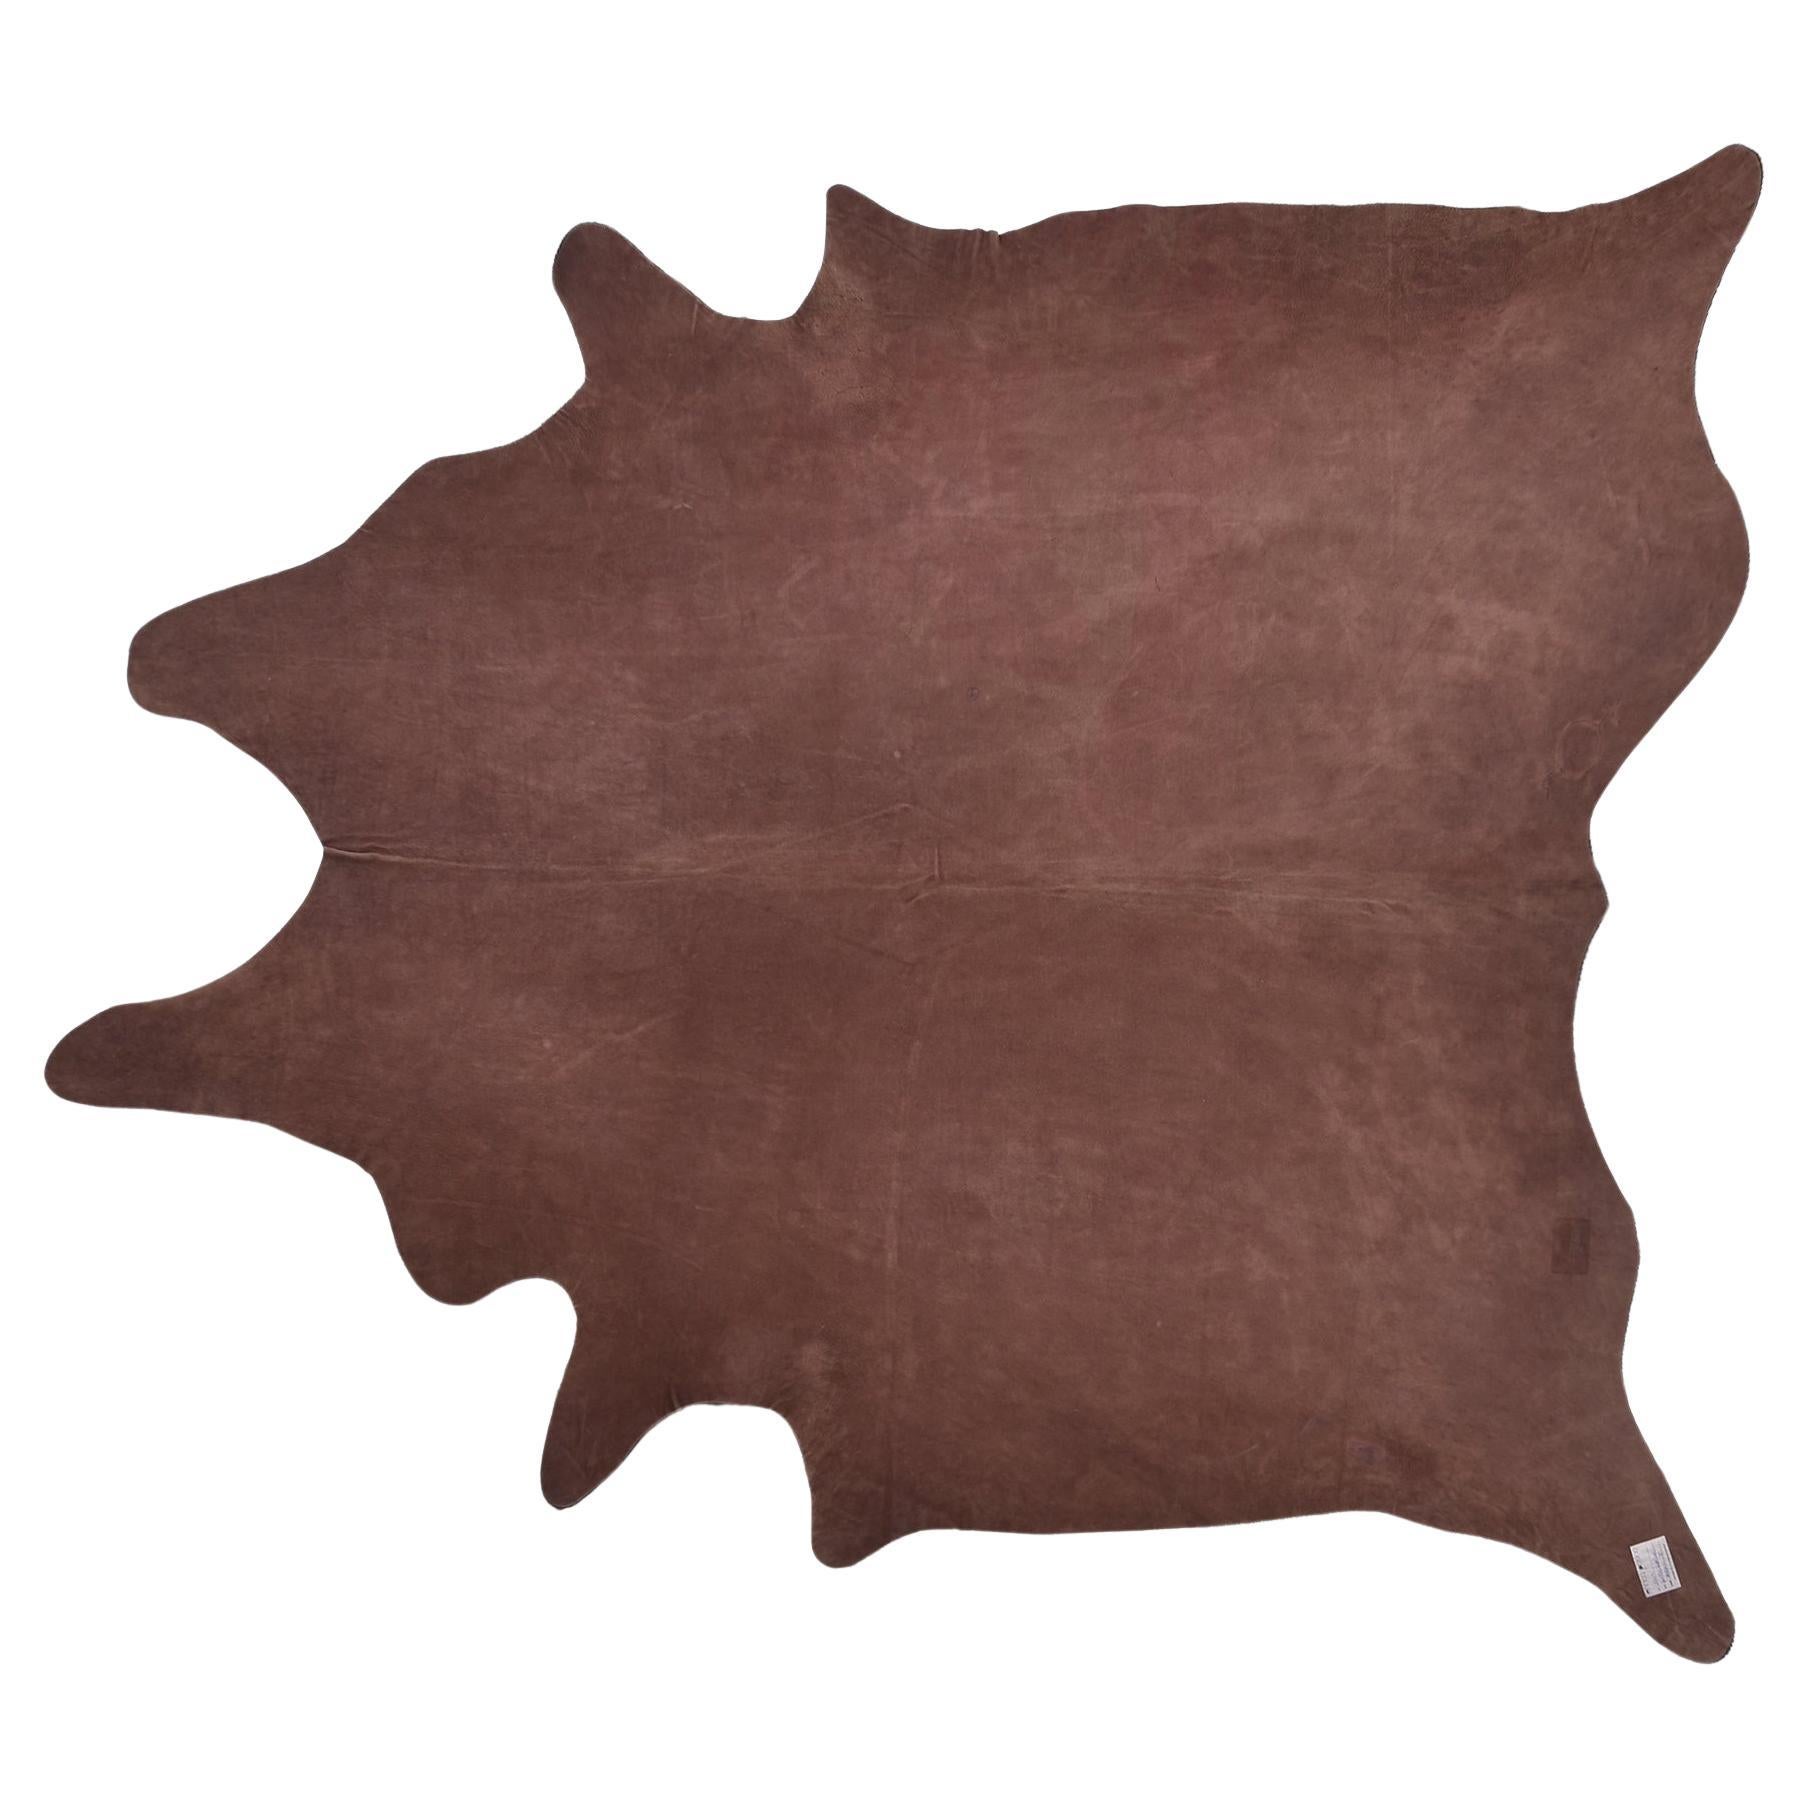 what is bovine leather